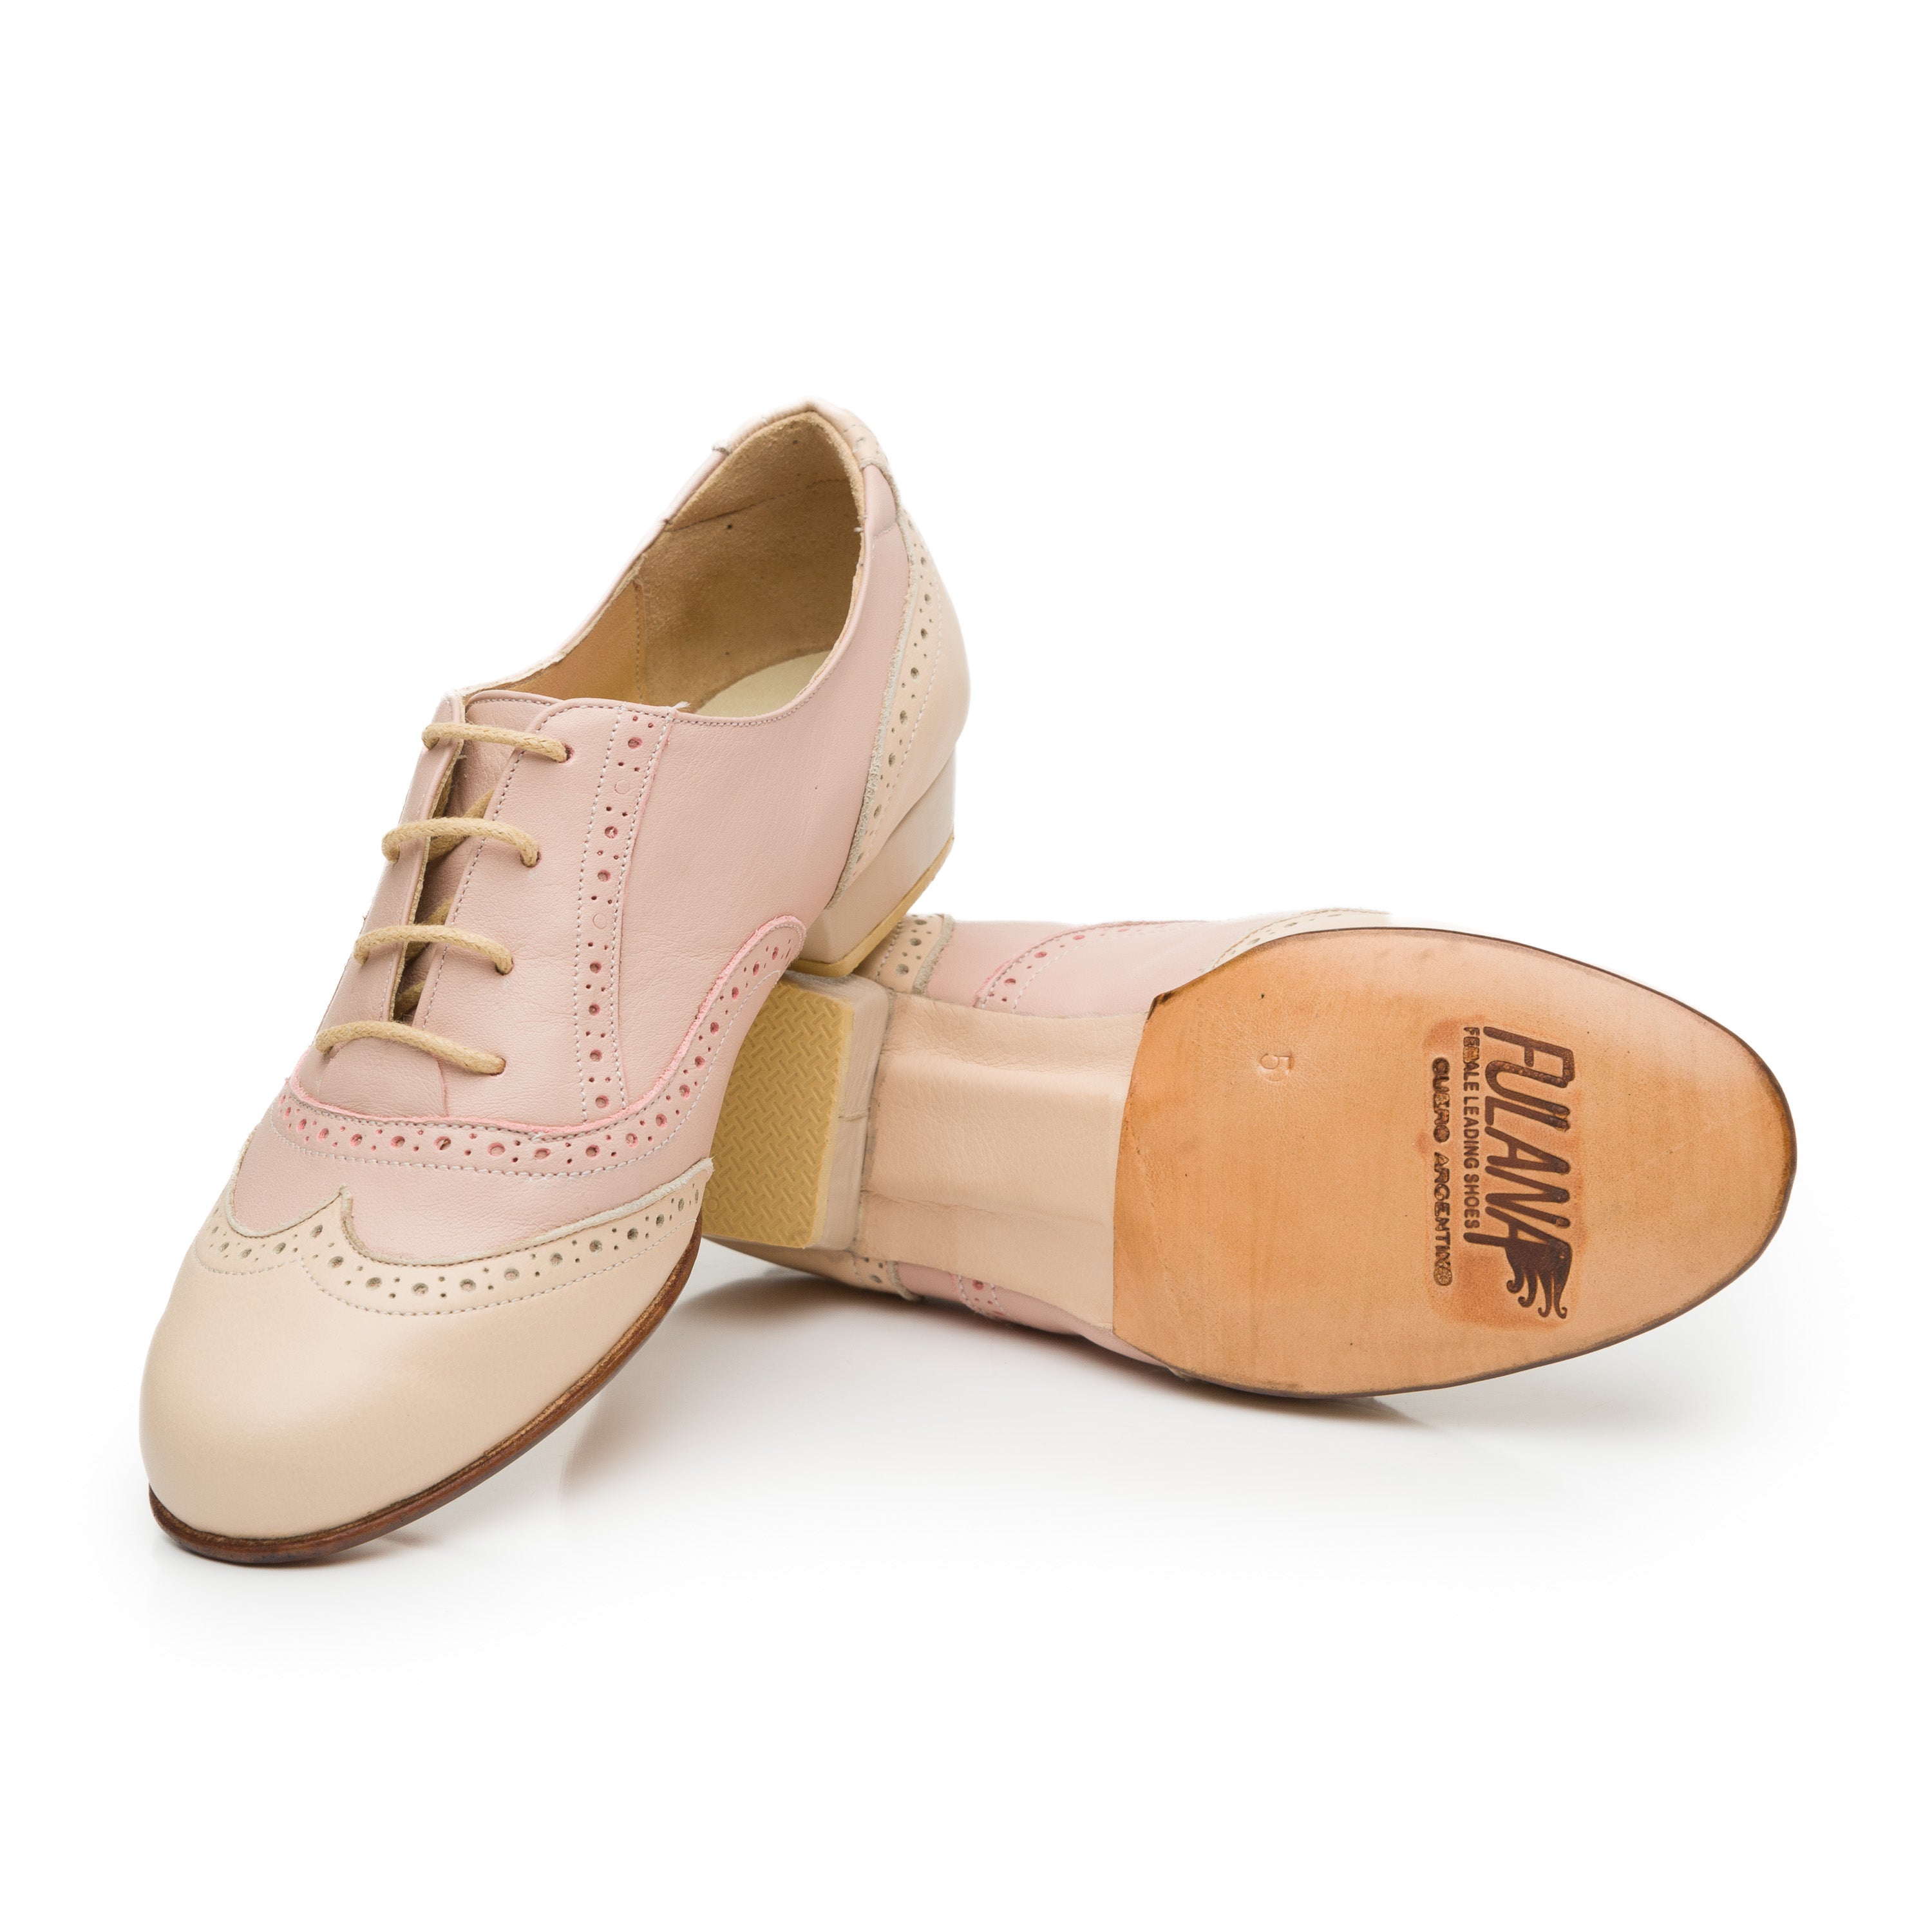 Verlengen Abstractie Christus Tango Practice & Leading Shoes From Argentina - Oxford Curvy / Beige &  Cream by Fulana – Axis Tango